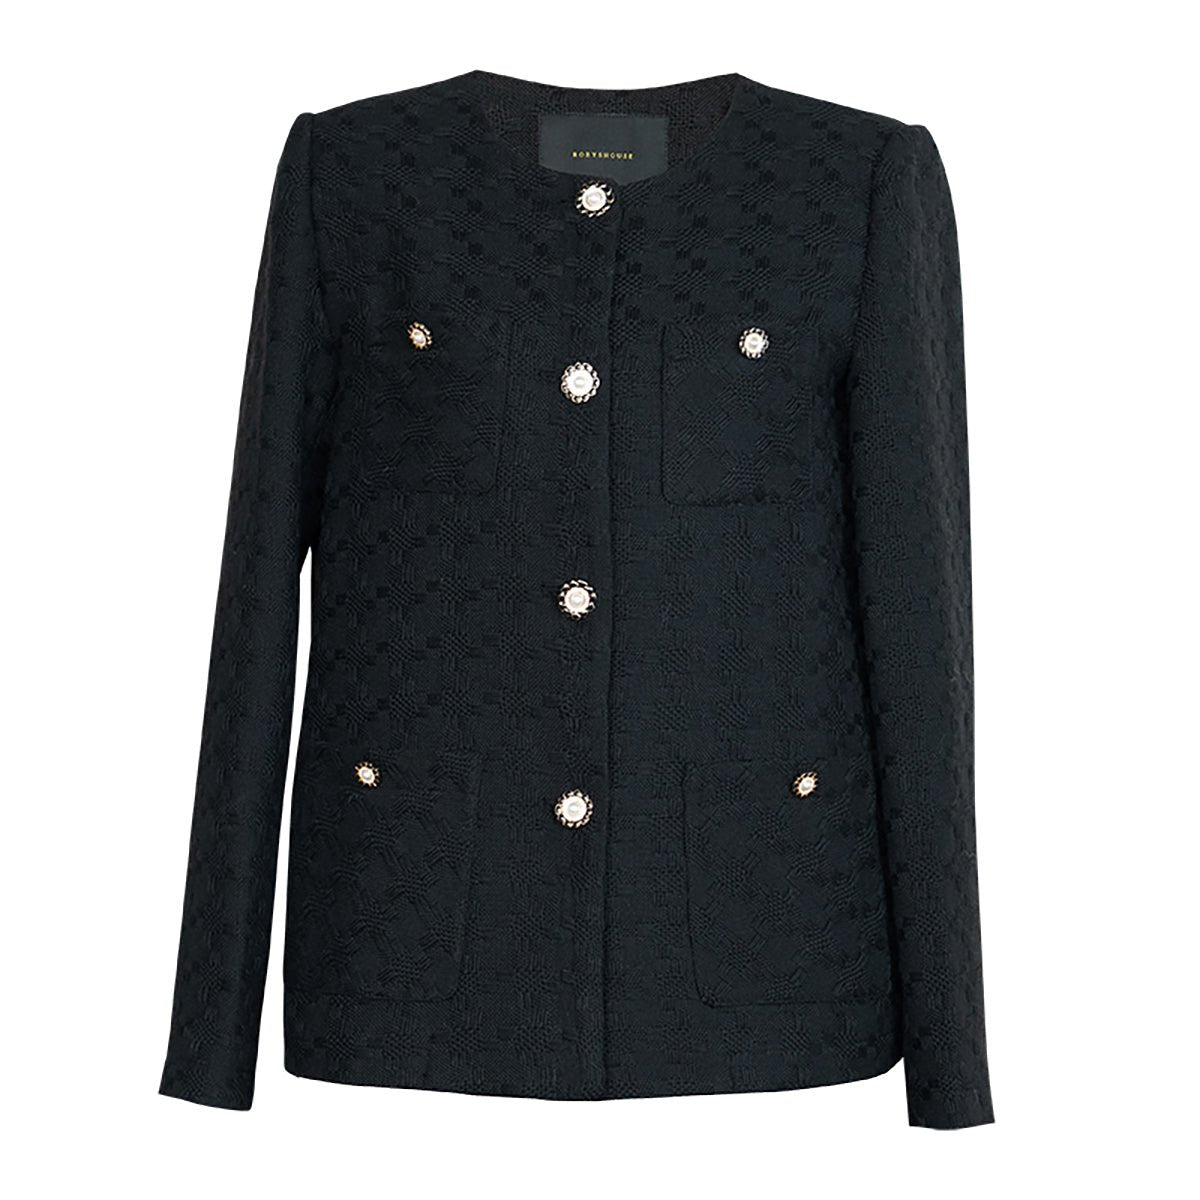 Black Buttoned Jacket with Embroidered Edges